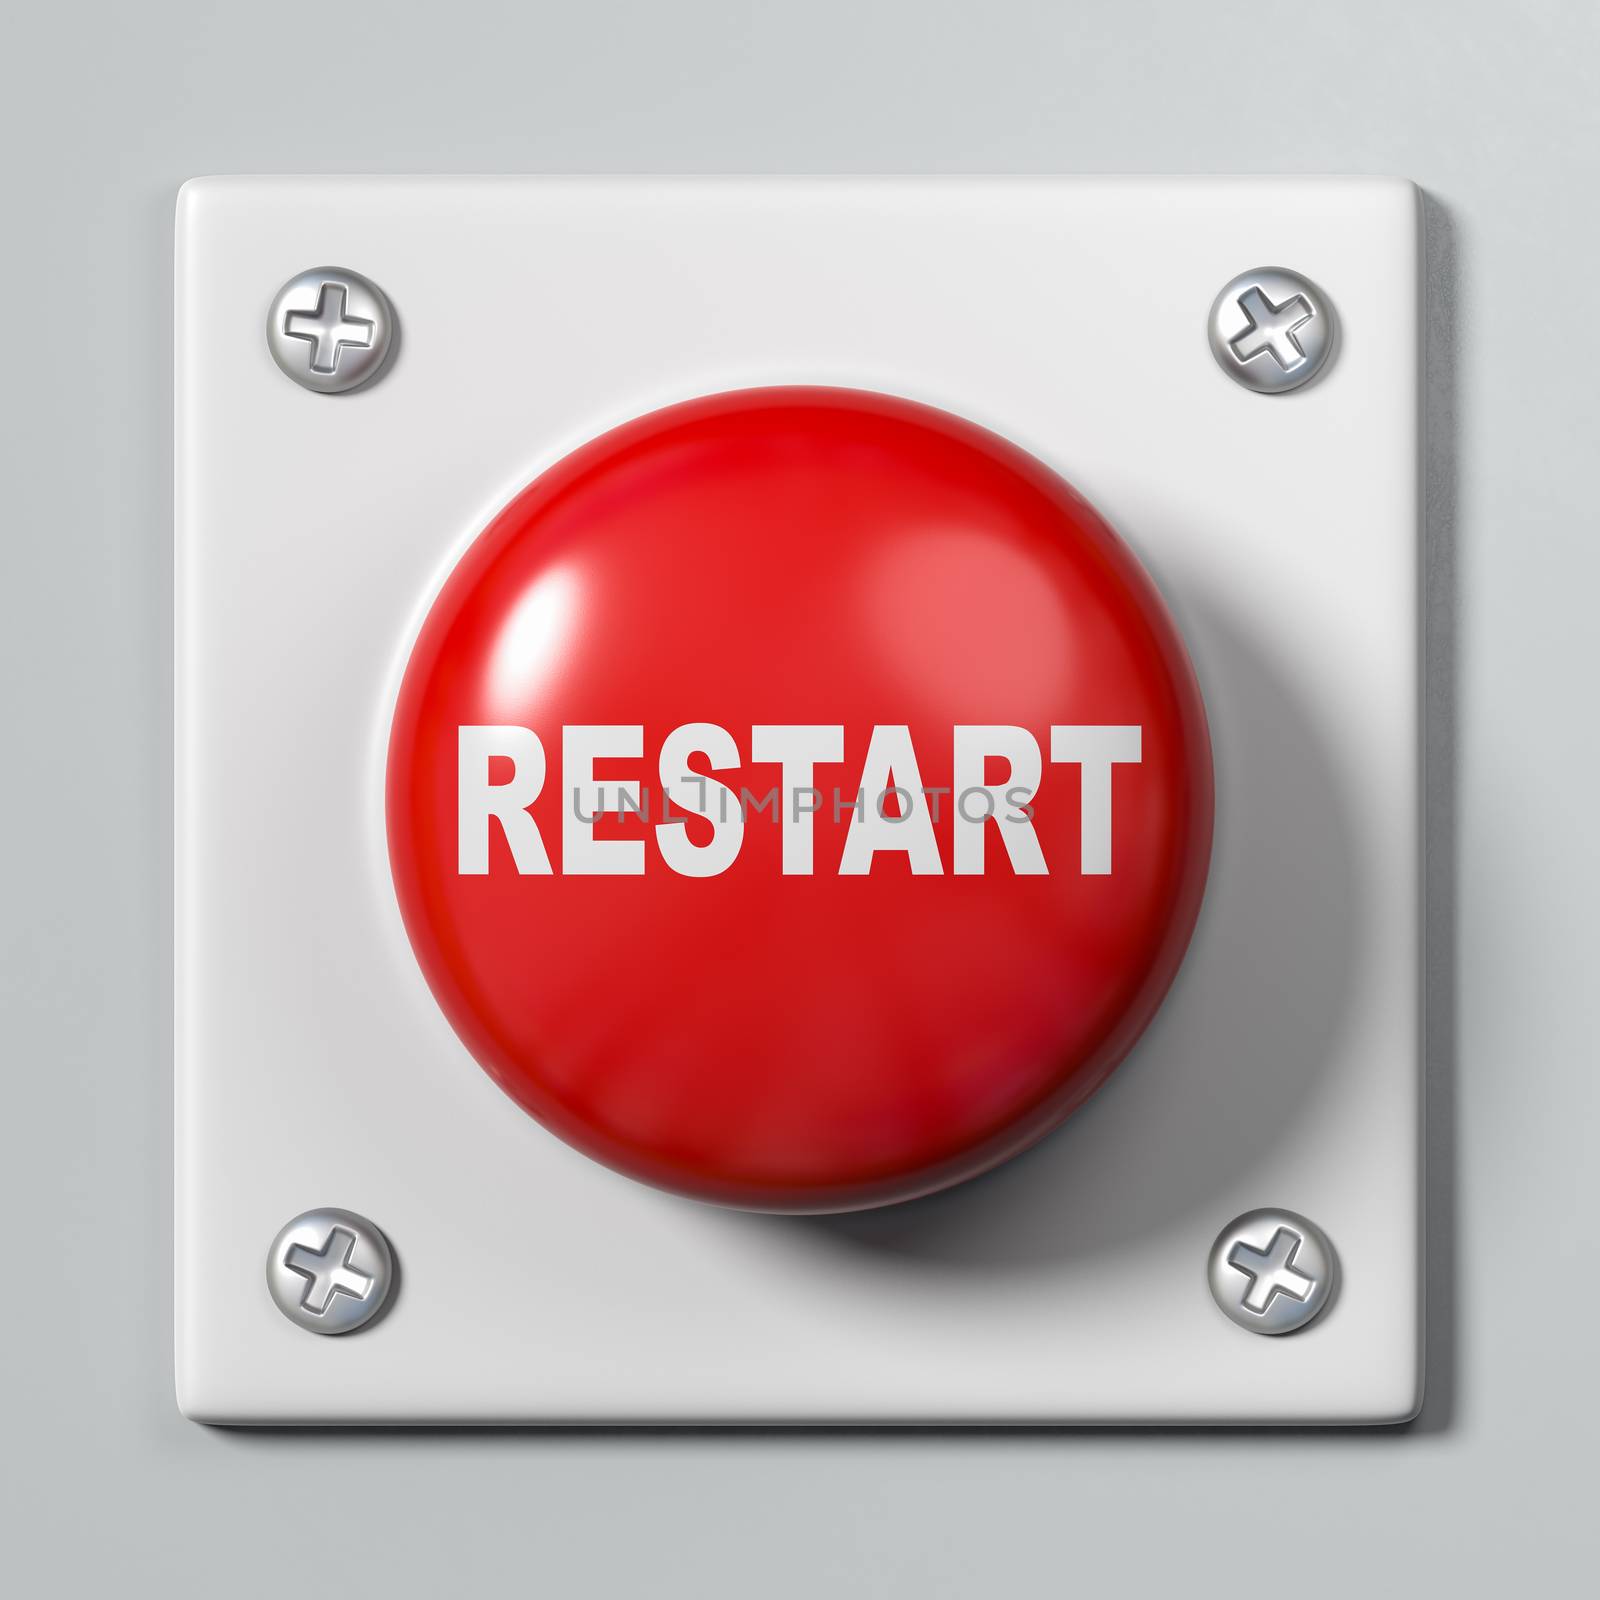 Red Button with Restart Text Against Gray Background 3D Illustration